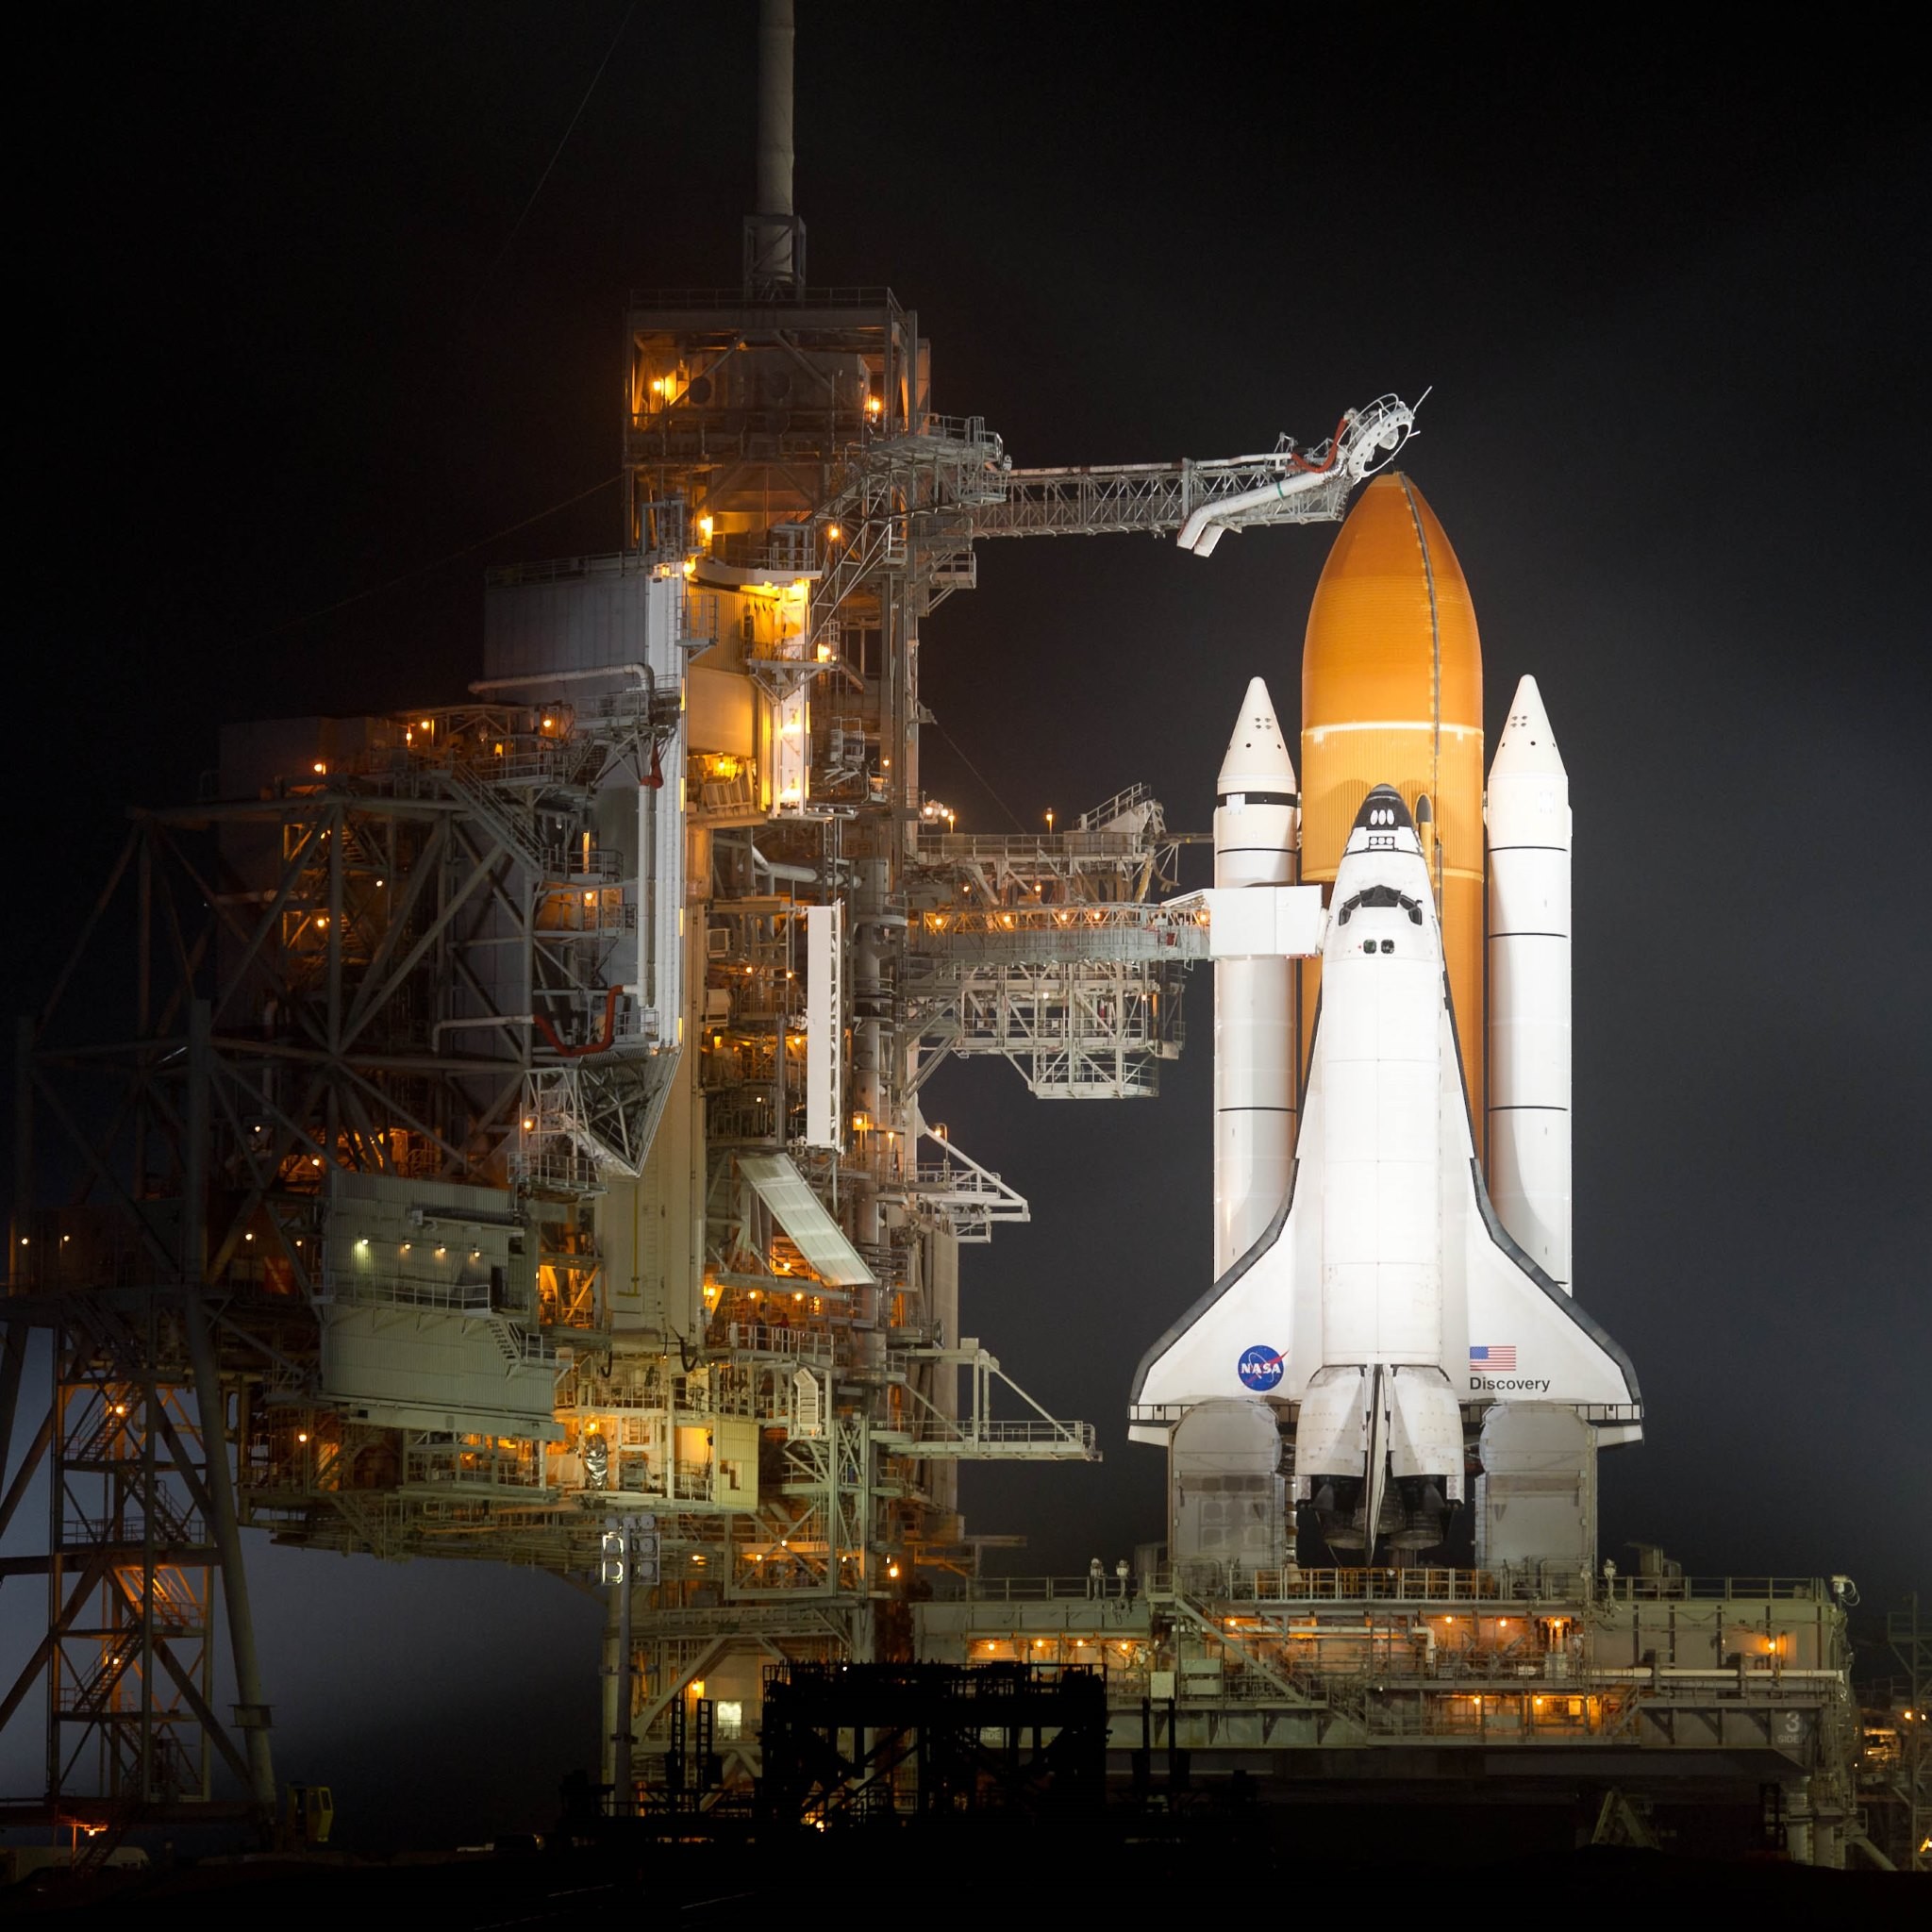 2048x2048 And in the 4th wallpaper is the NASA Discovery Shuttle on the launch  platform ready for download in 4K, HD and wide sizes